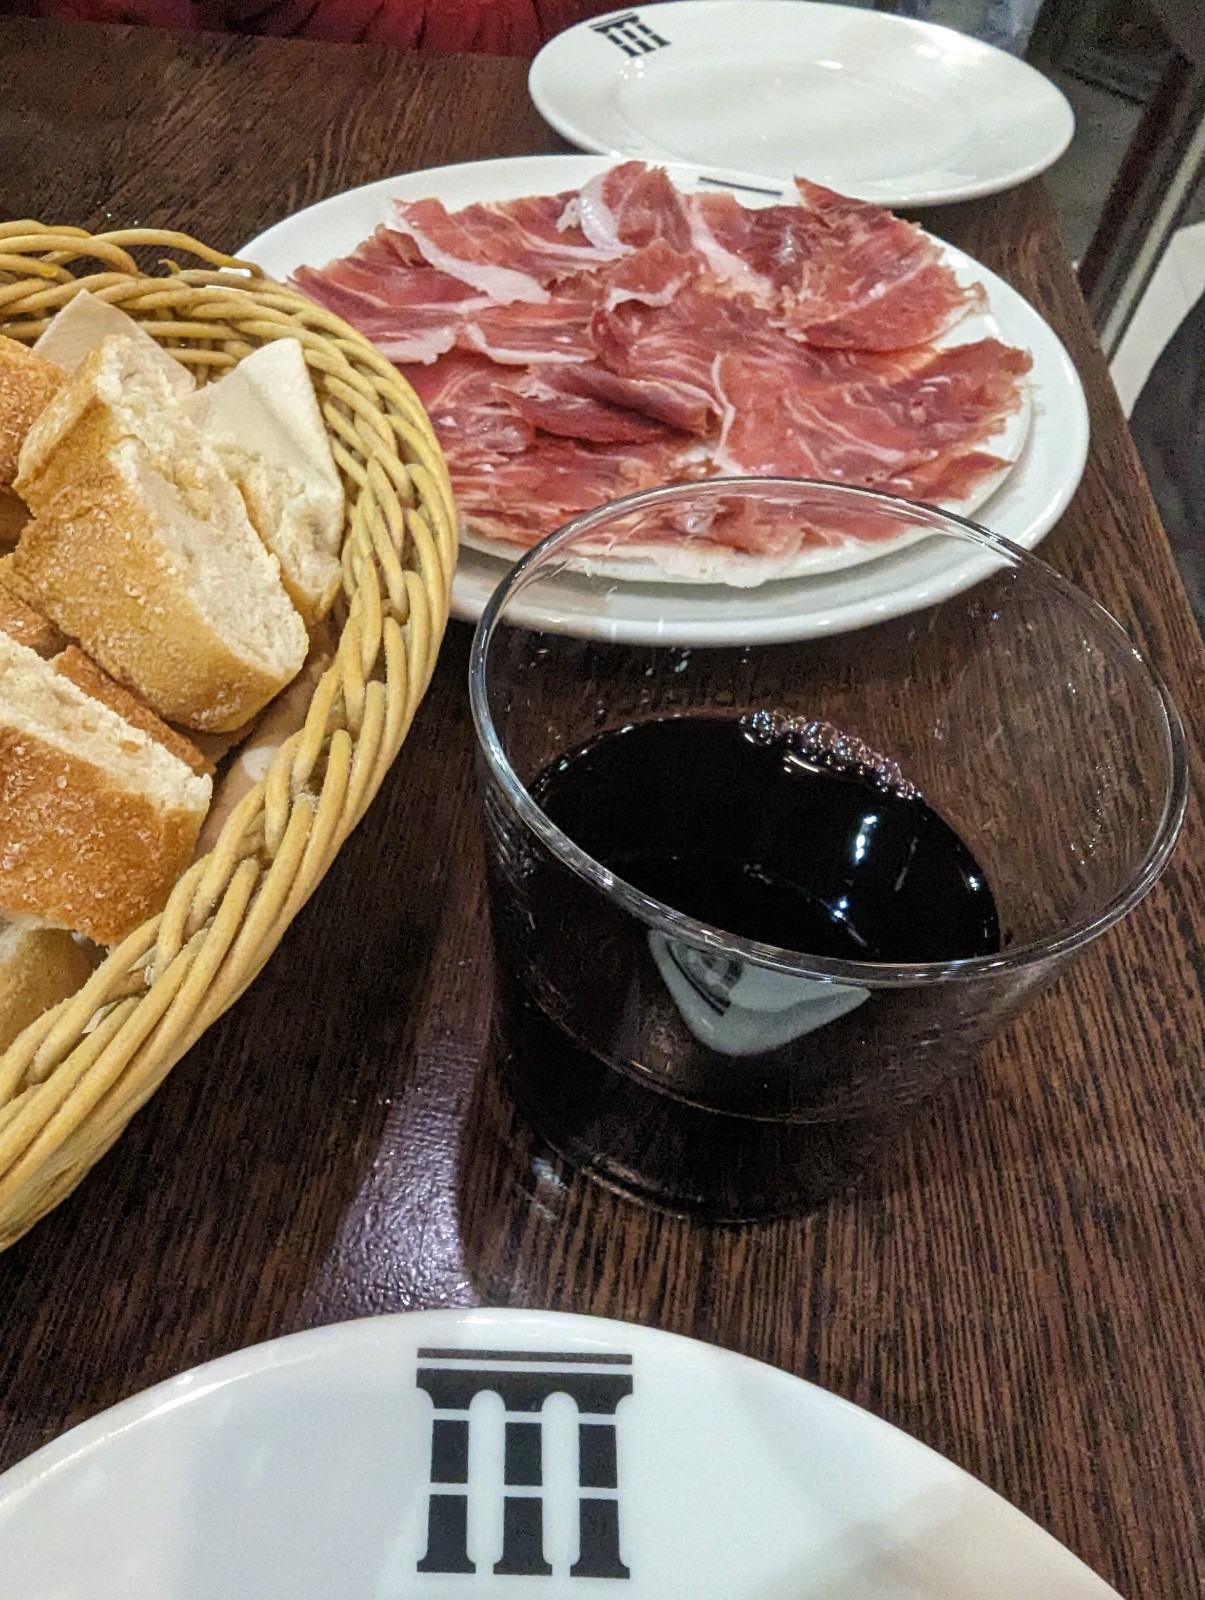 a plate of meat and bread on a table